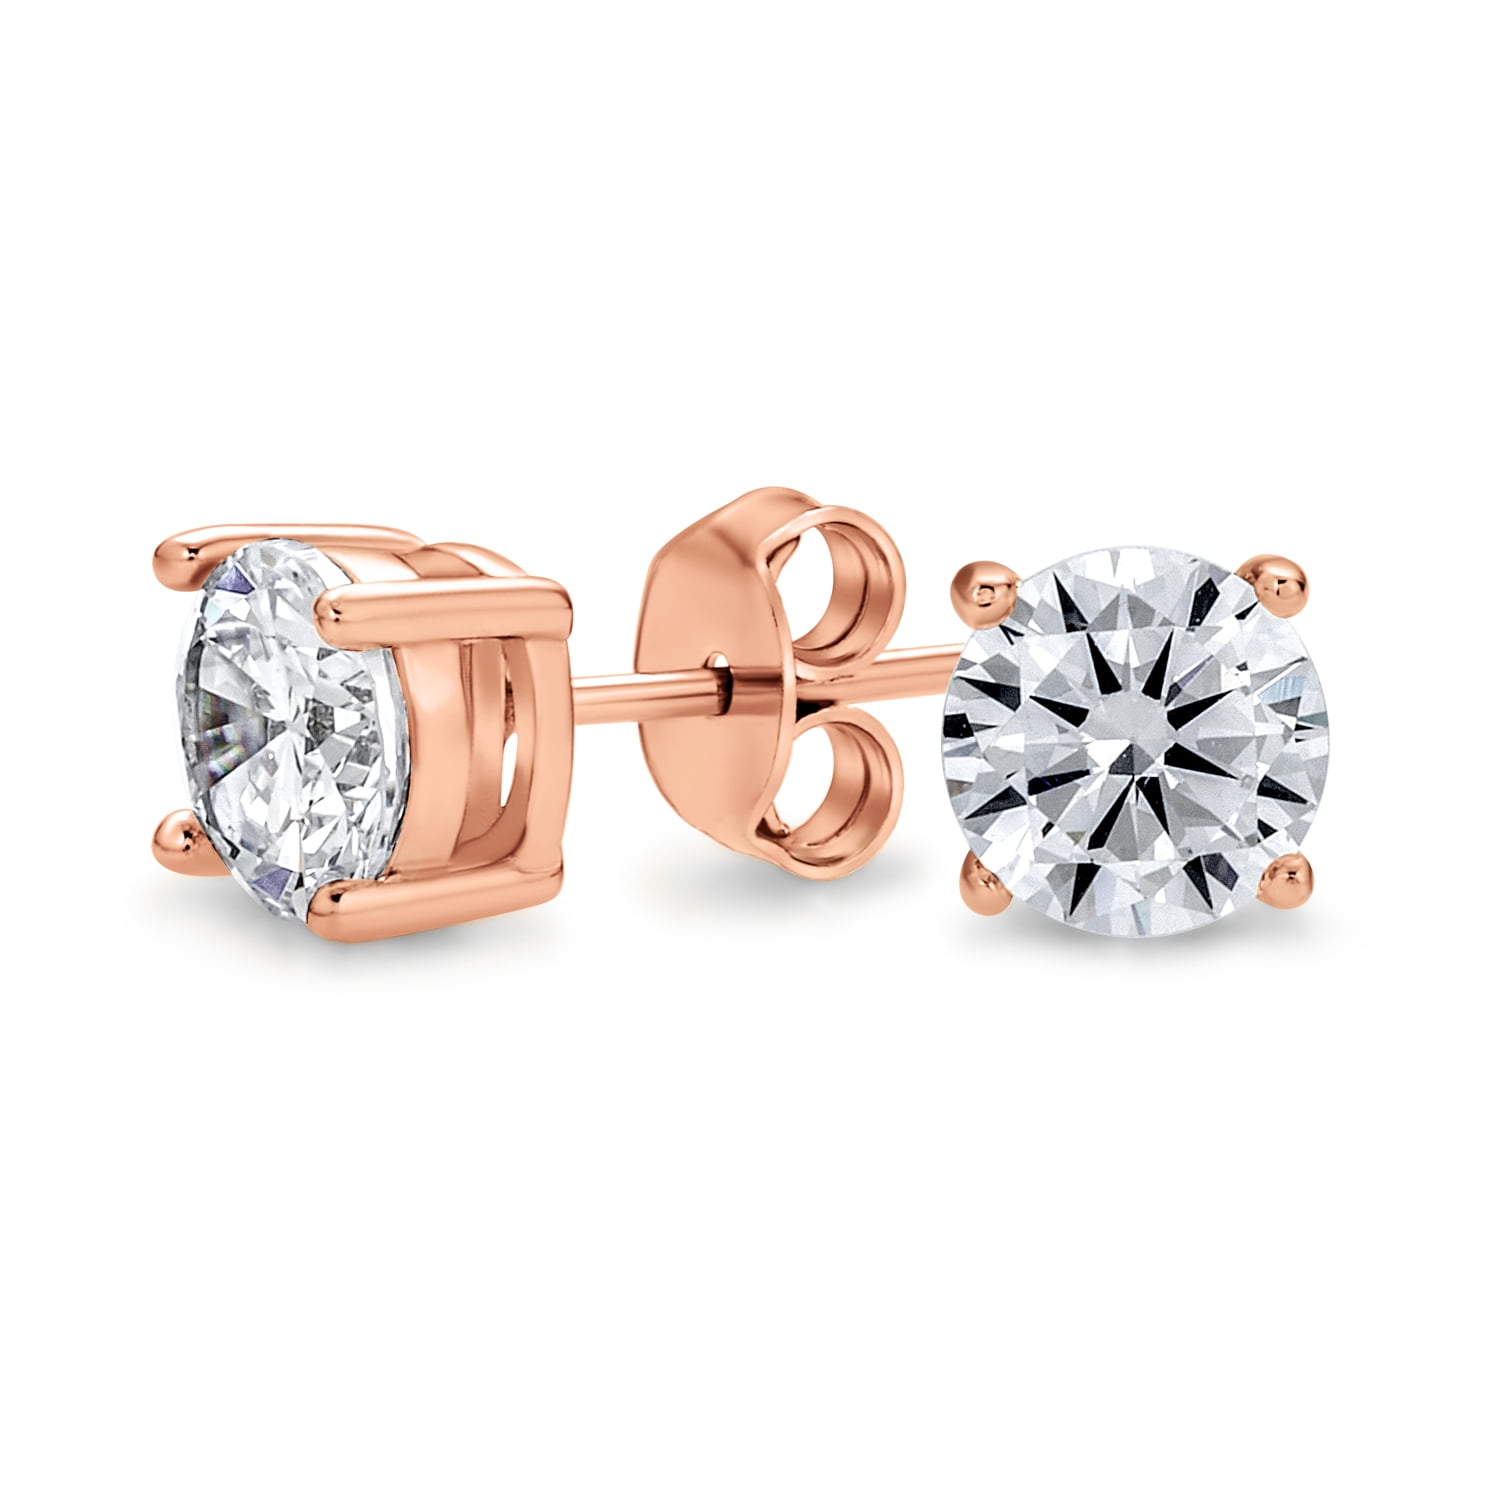 18k Rose Gold Plated Cubic Zirconia Stud Earrings for Women Girls Gifts Idea 